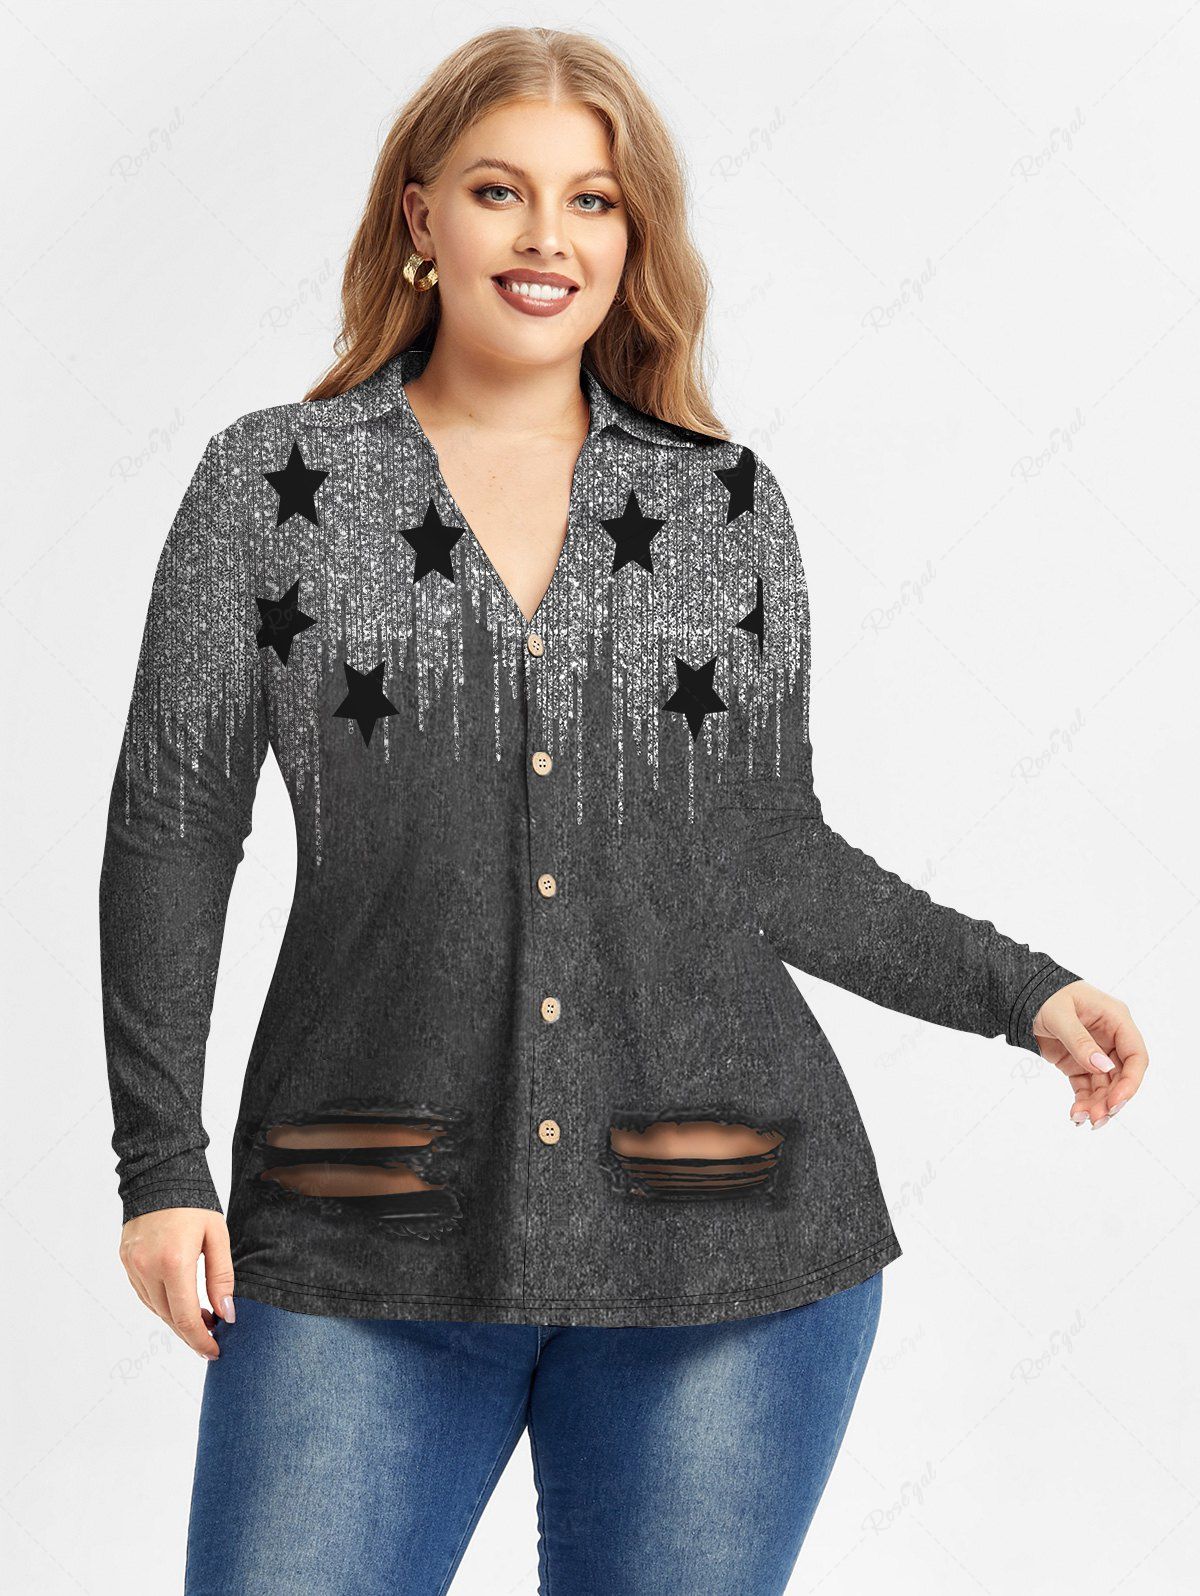 Sale Plus Size Star 3D Ripped Print Sparkly Glitter Shirt  